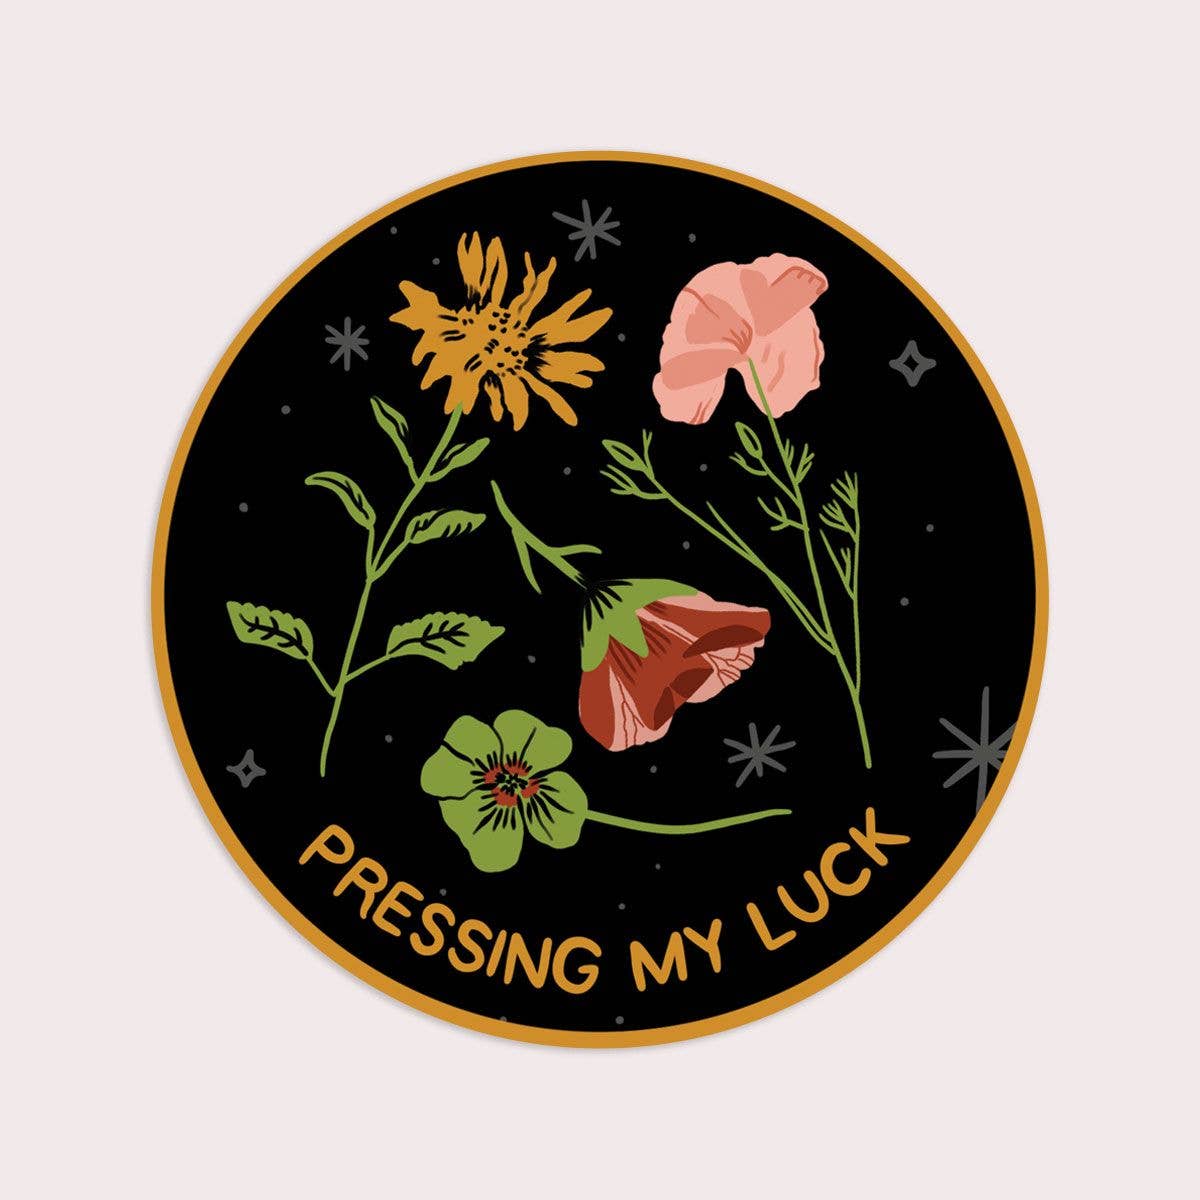 Pressing my Luck Vinyl Sticker - Out of the Blue